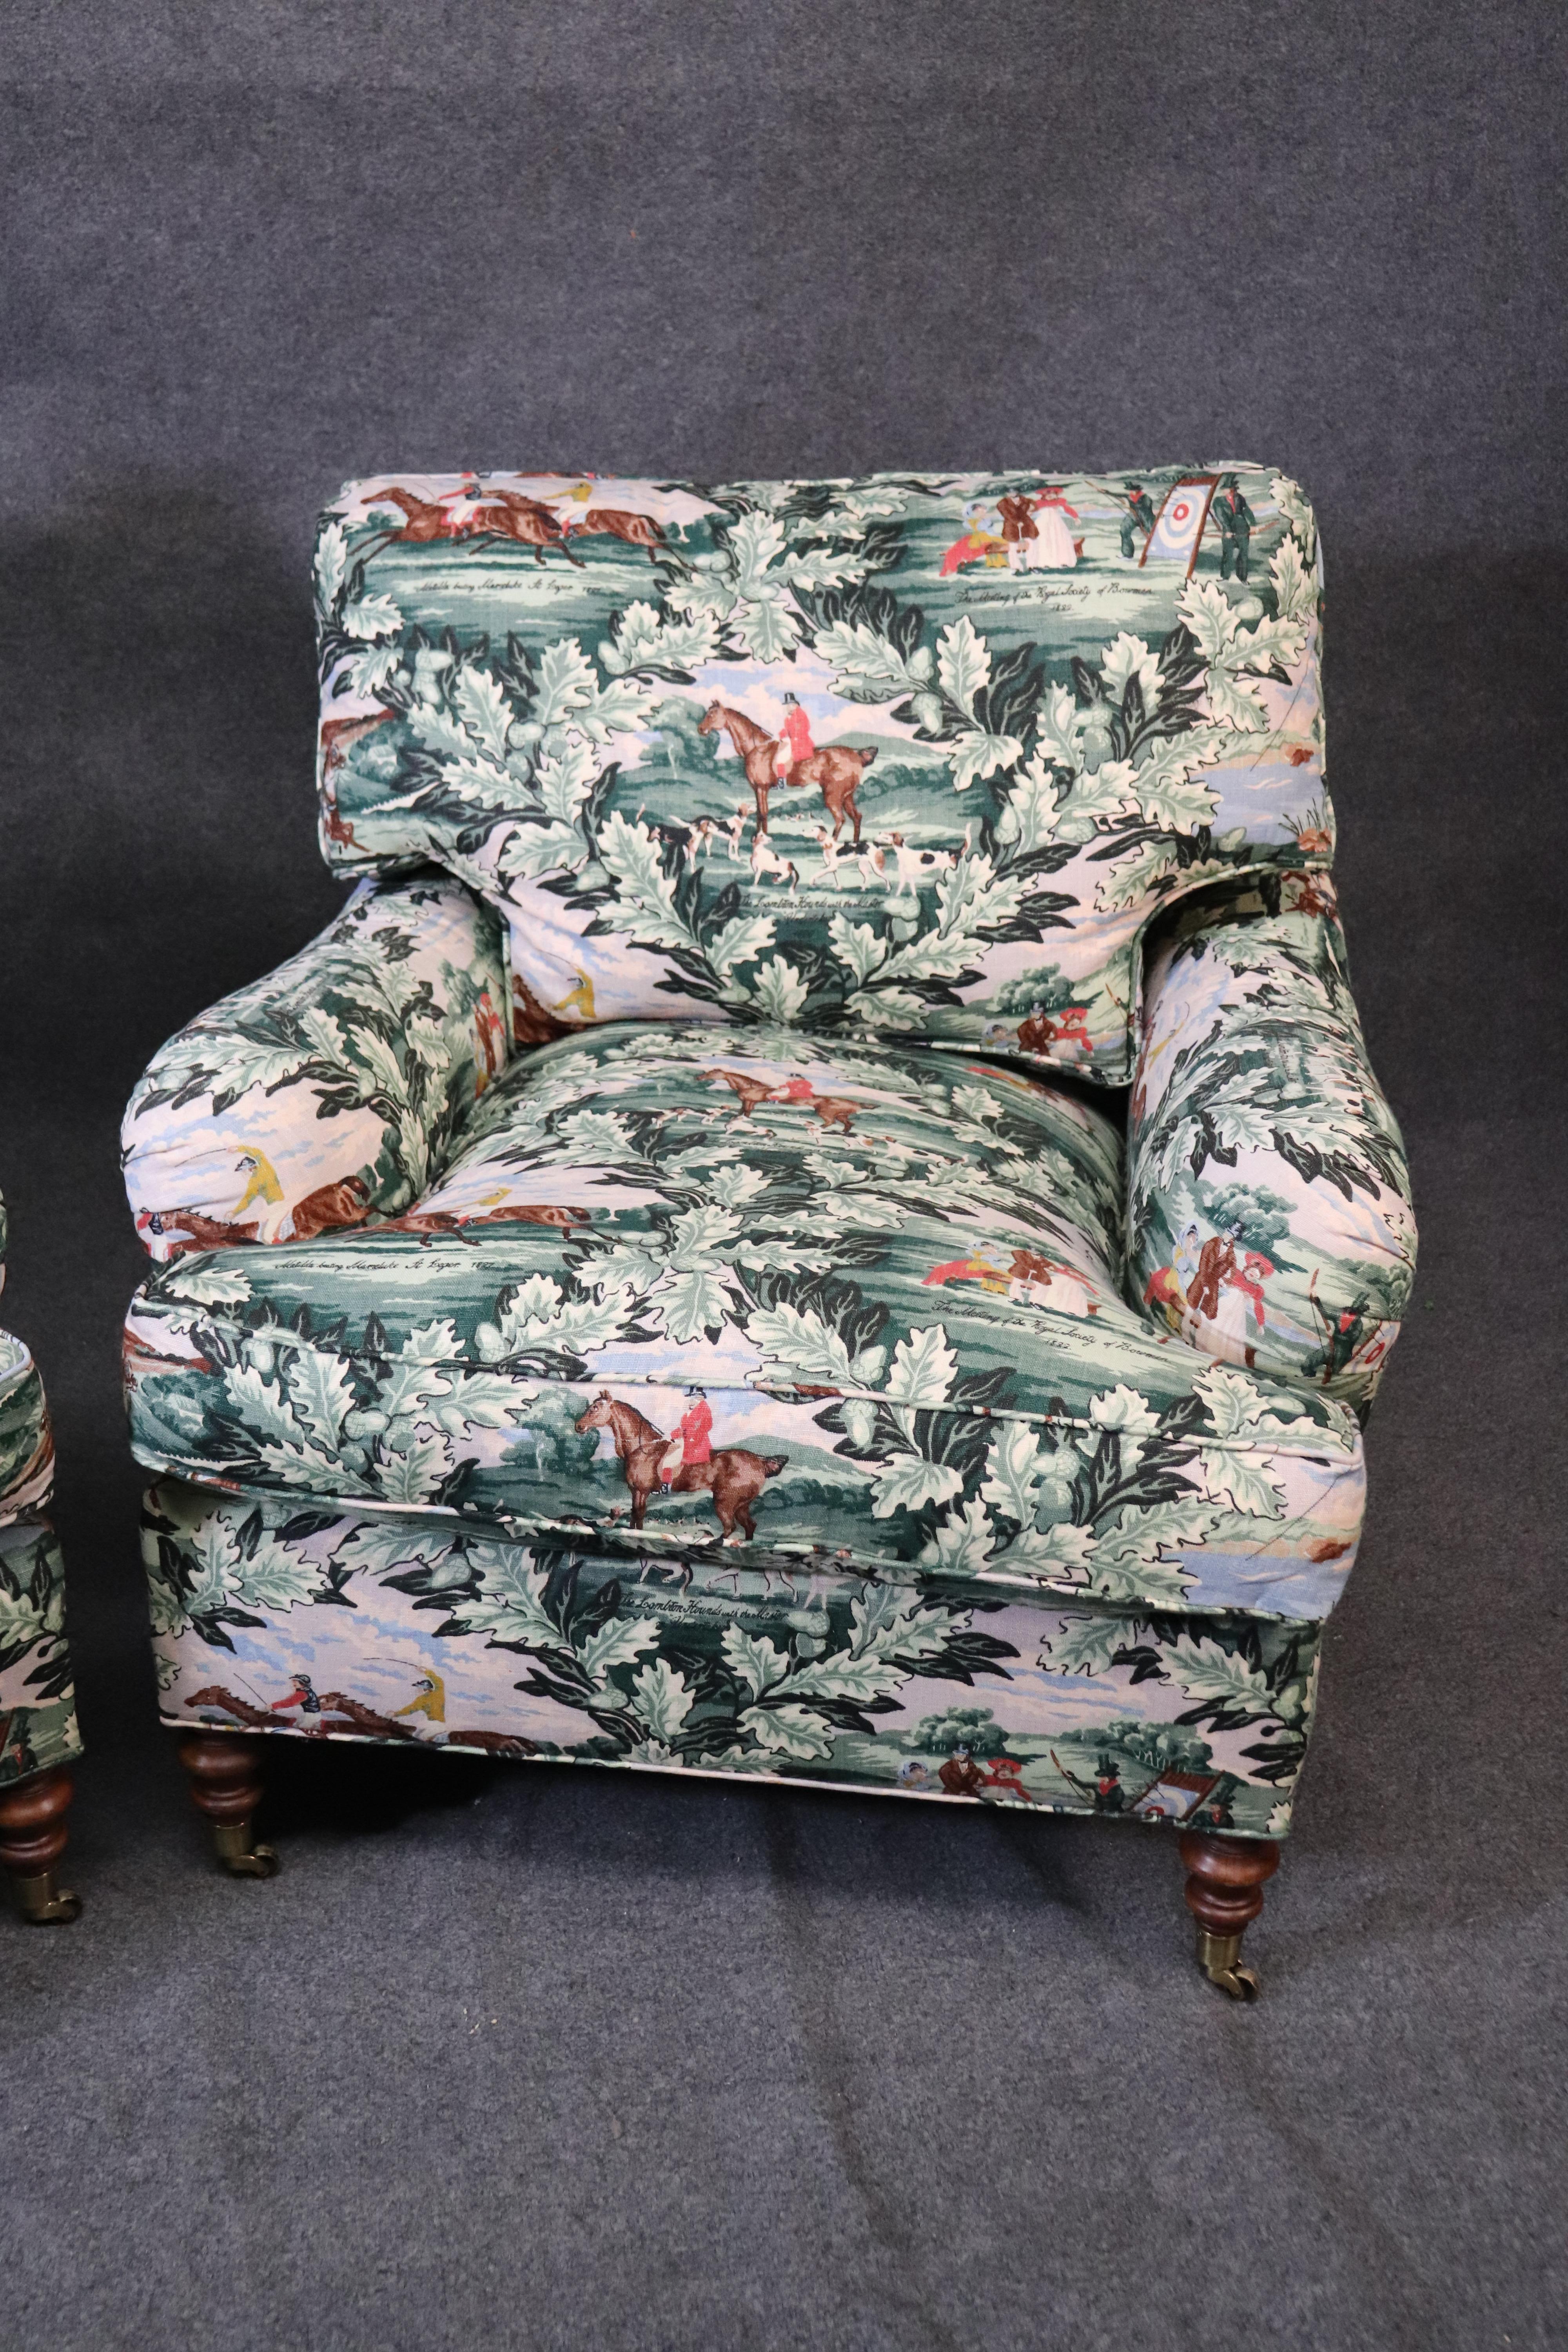 This is a beautiful pair of Edward Ferrell club chairs with antique polo playing motifs. The chairs are in very good original condition. They measure 32 tall x 35 wide x 43 deep and the seat height is 20 inches.